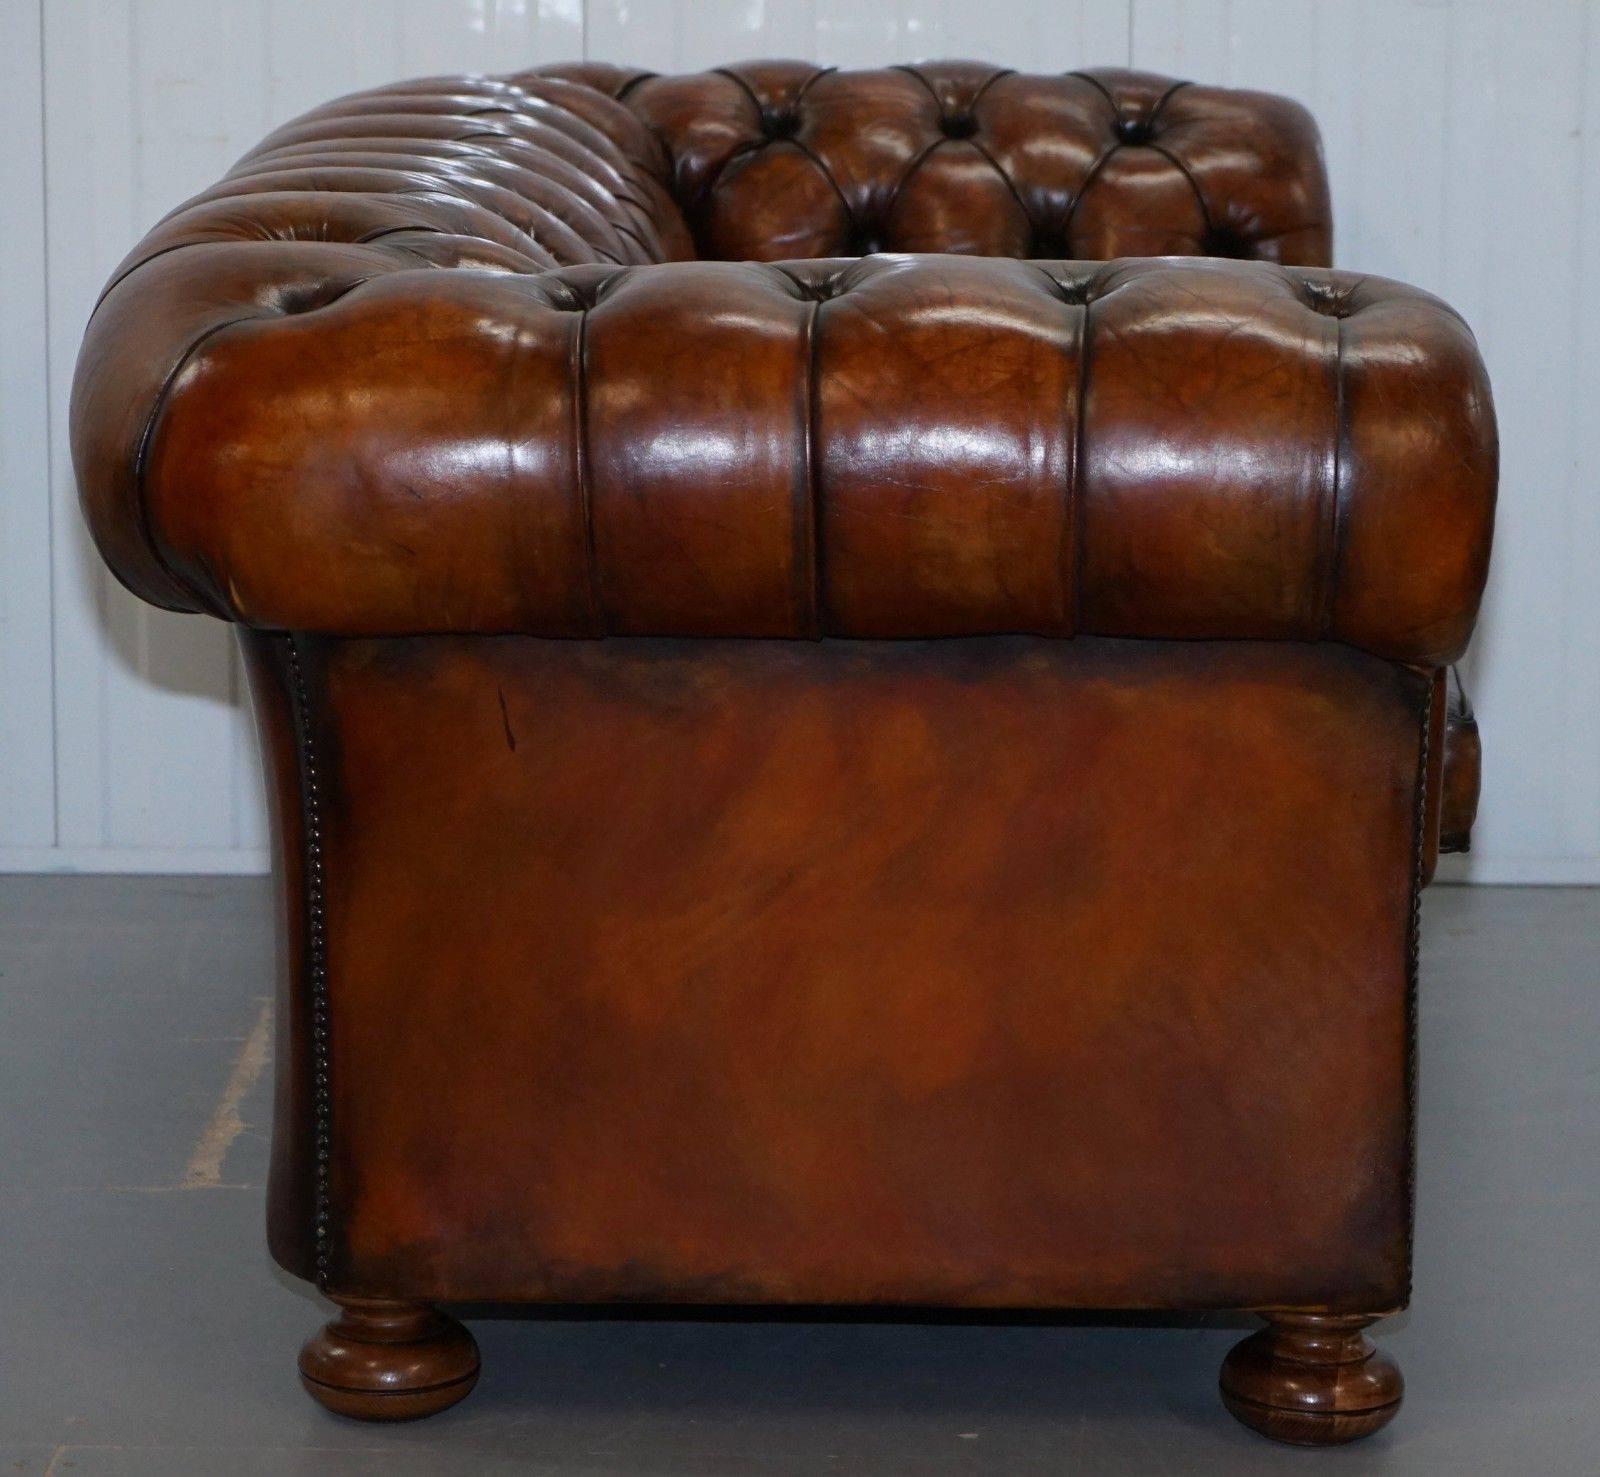 Sprung Walnut Thomas Chippendale Restored Aged Brown Leather Chesterfield Sofa 4